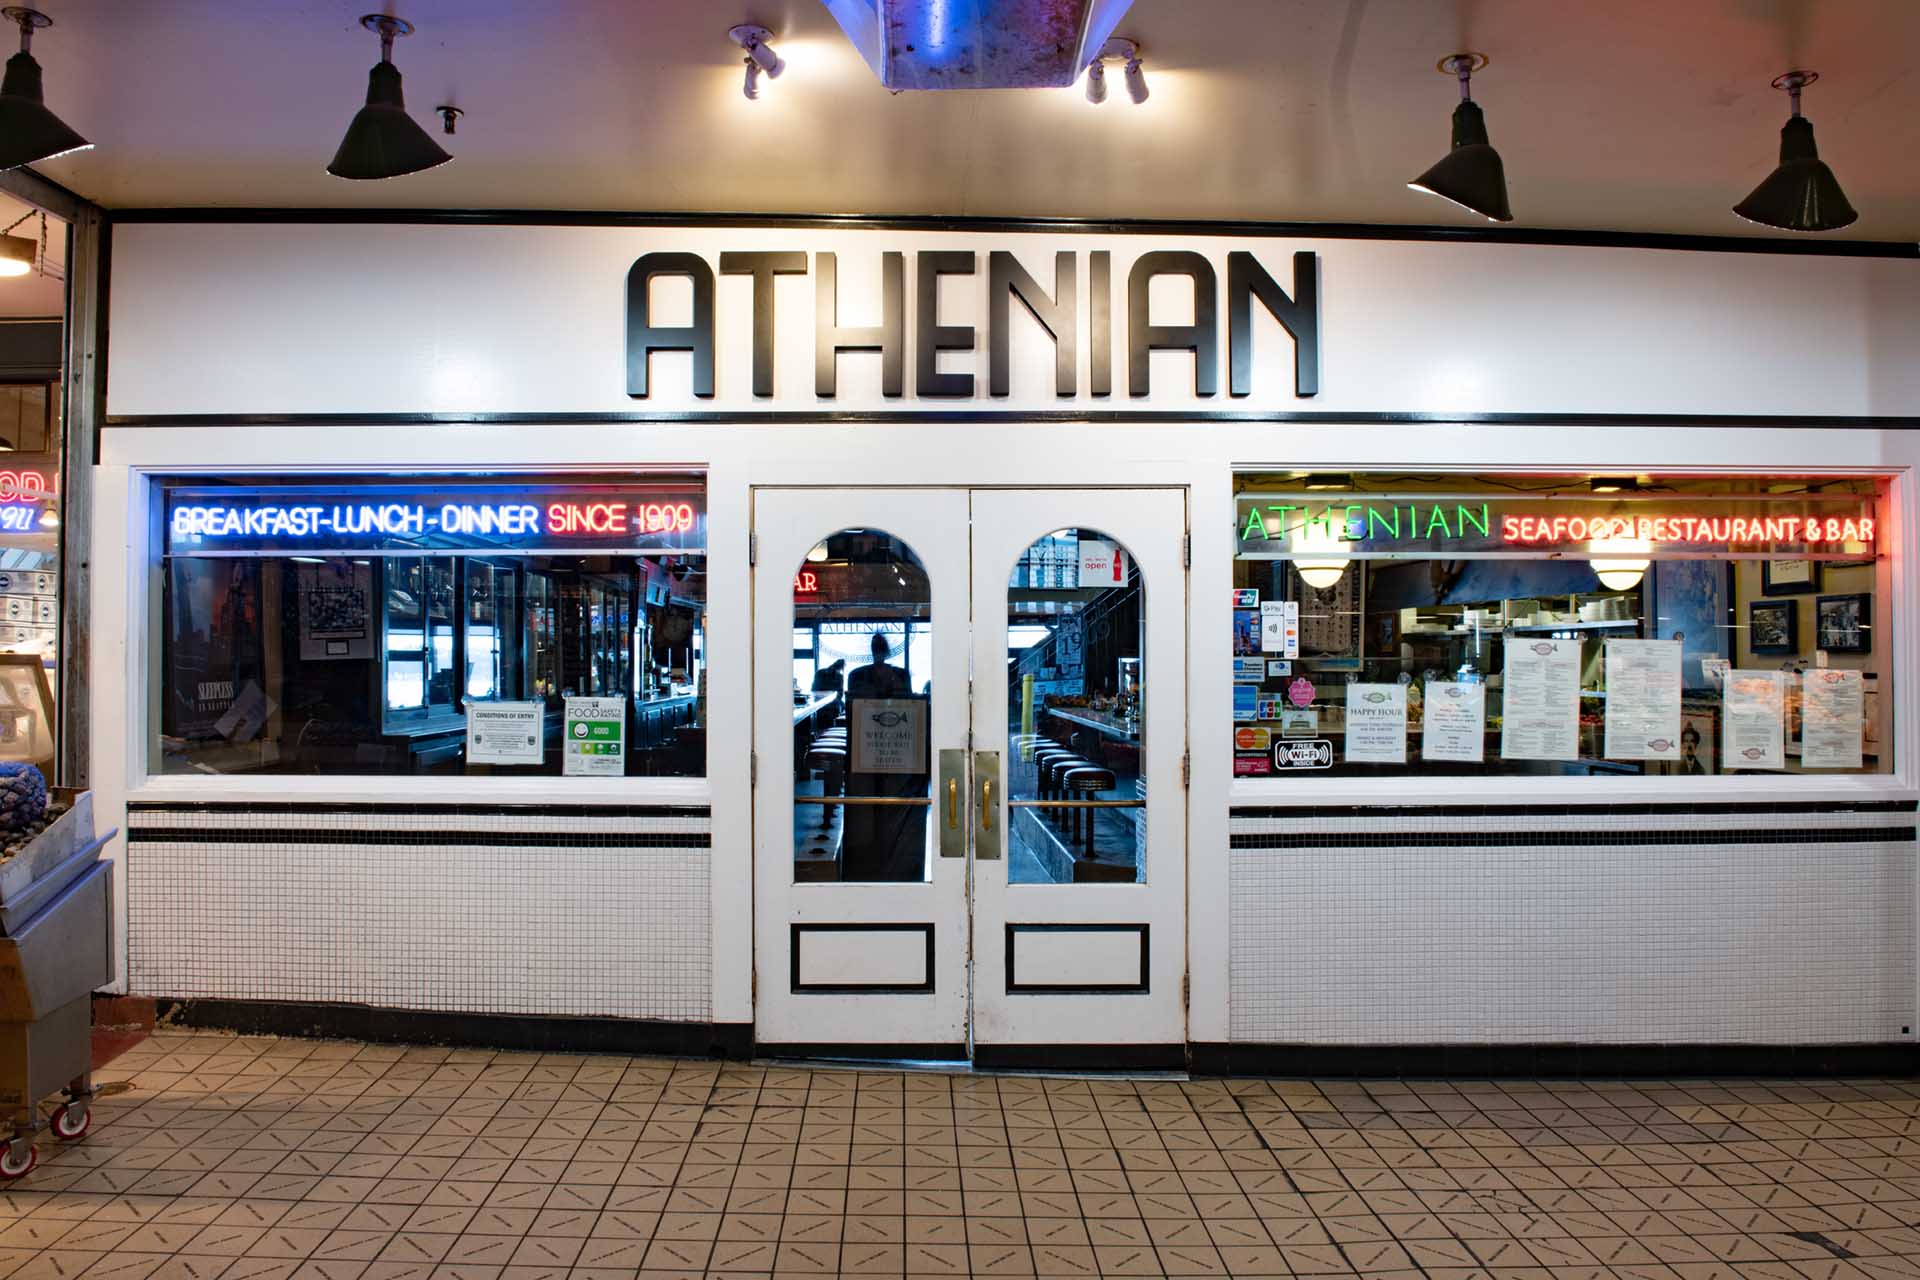 The Athenian Seafood Restaurant and Bar - Pike Place Market